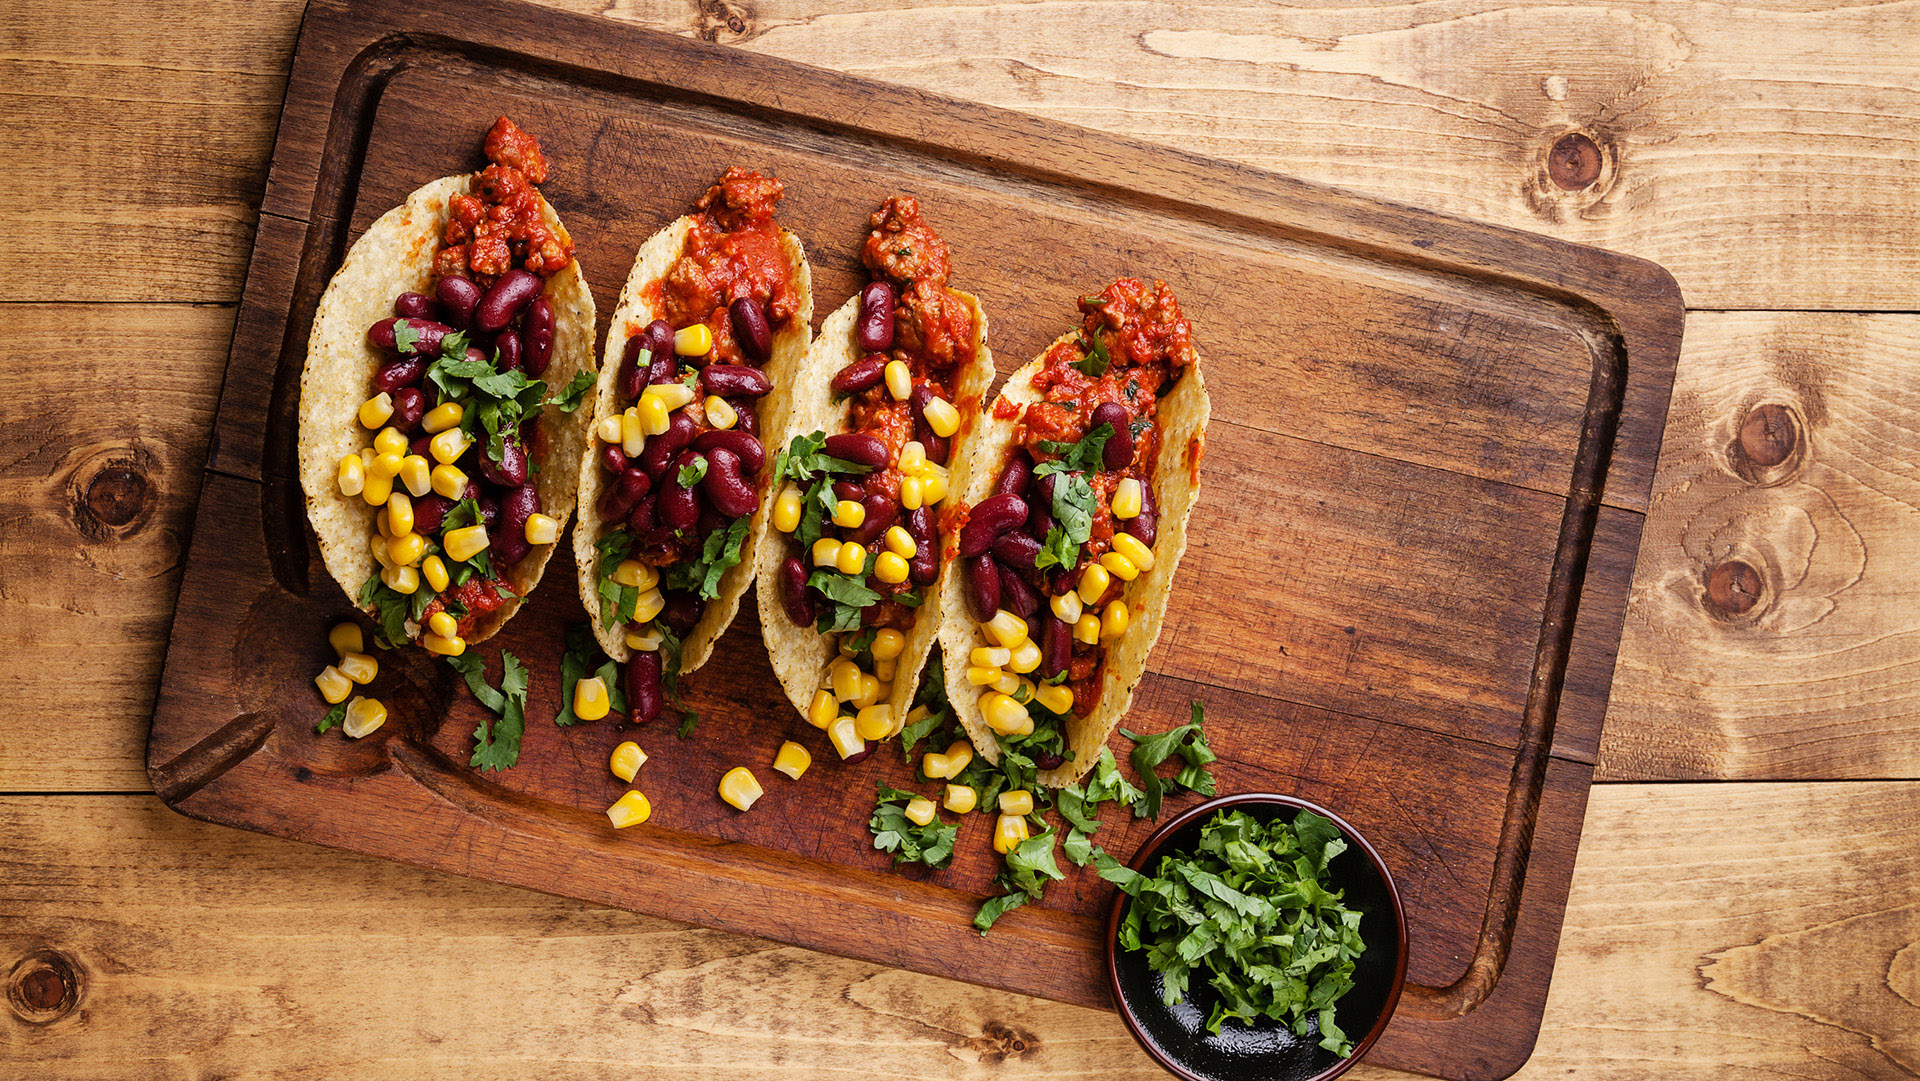 Tacos with ground beef, corn and red beans on wooden table